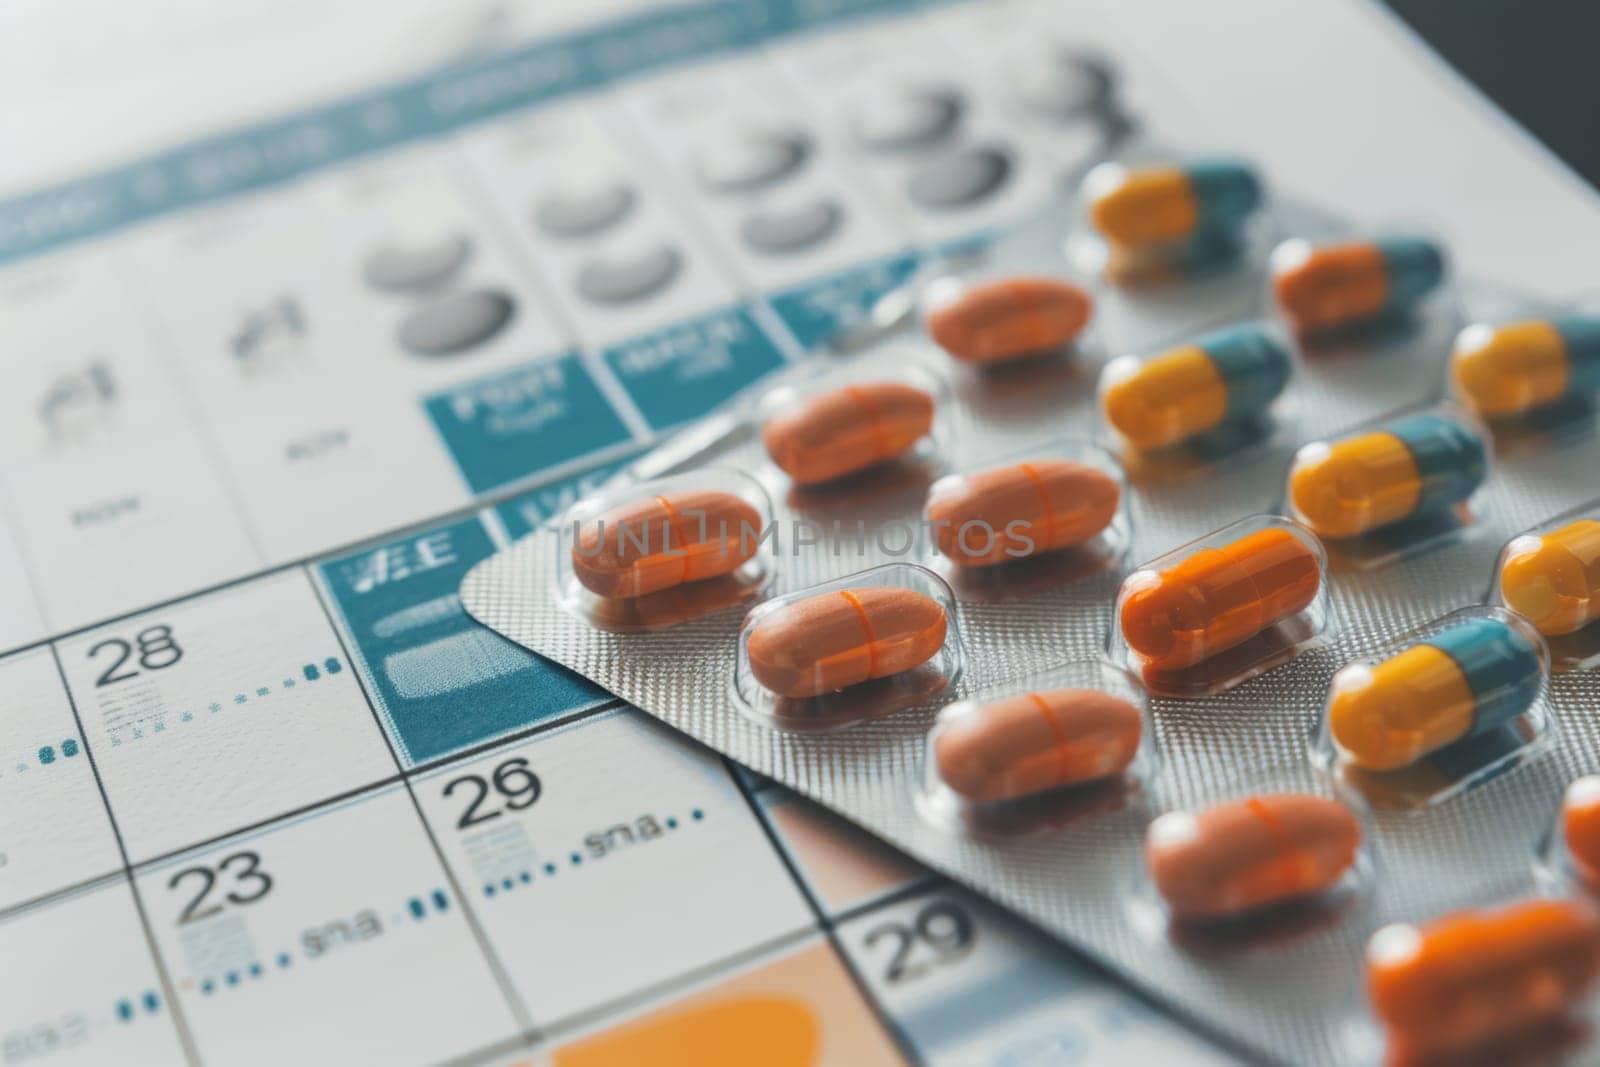 Medication Schedule with Pills and Calendar by andreyz